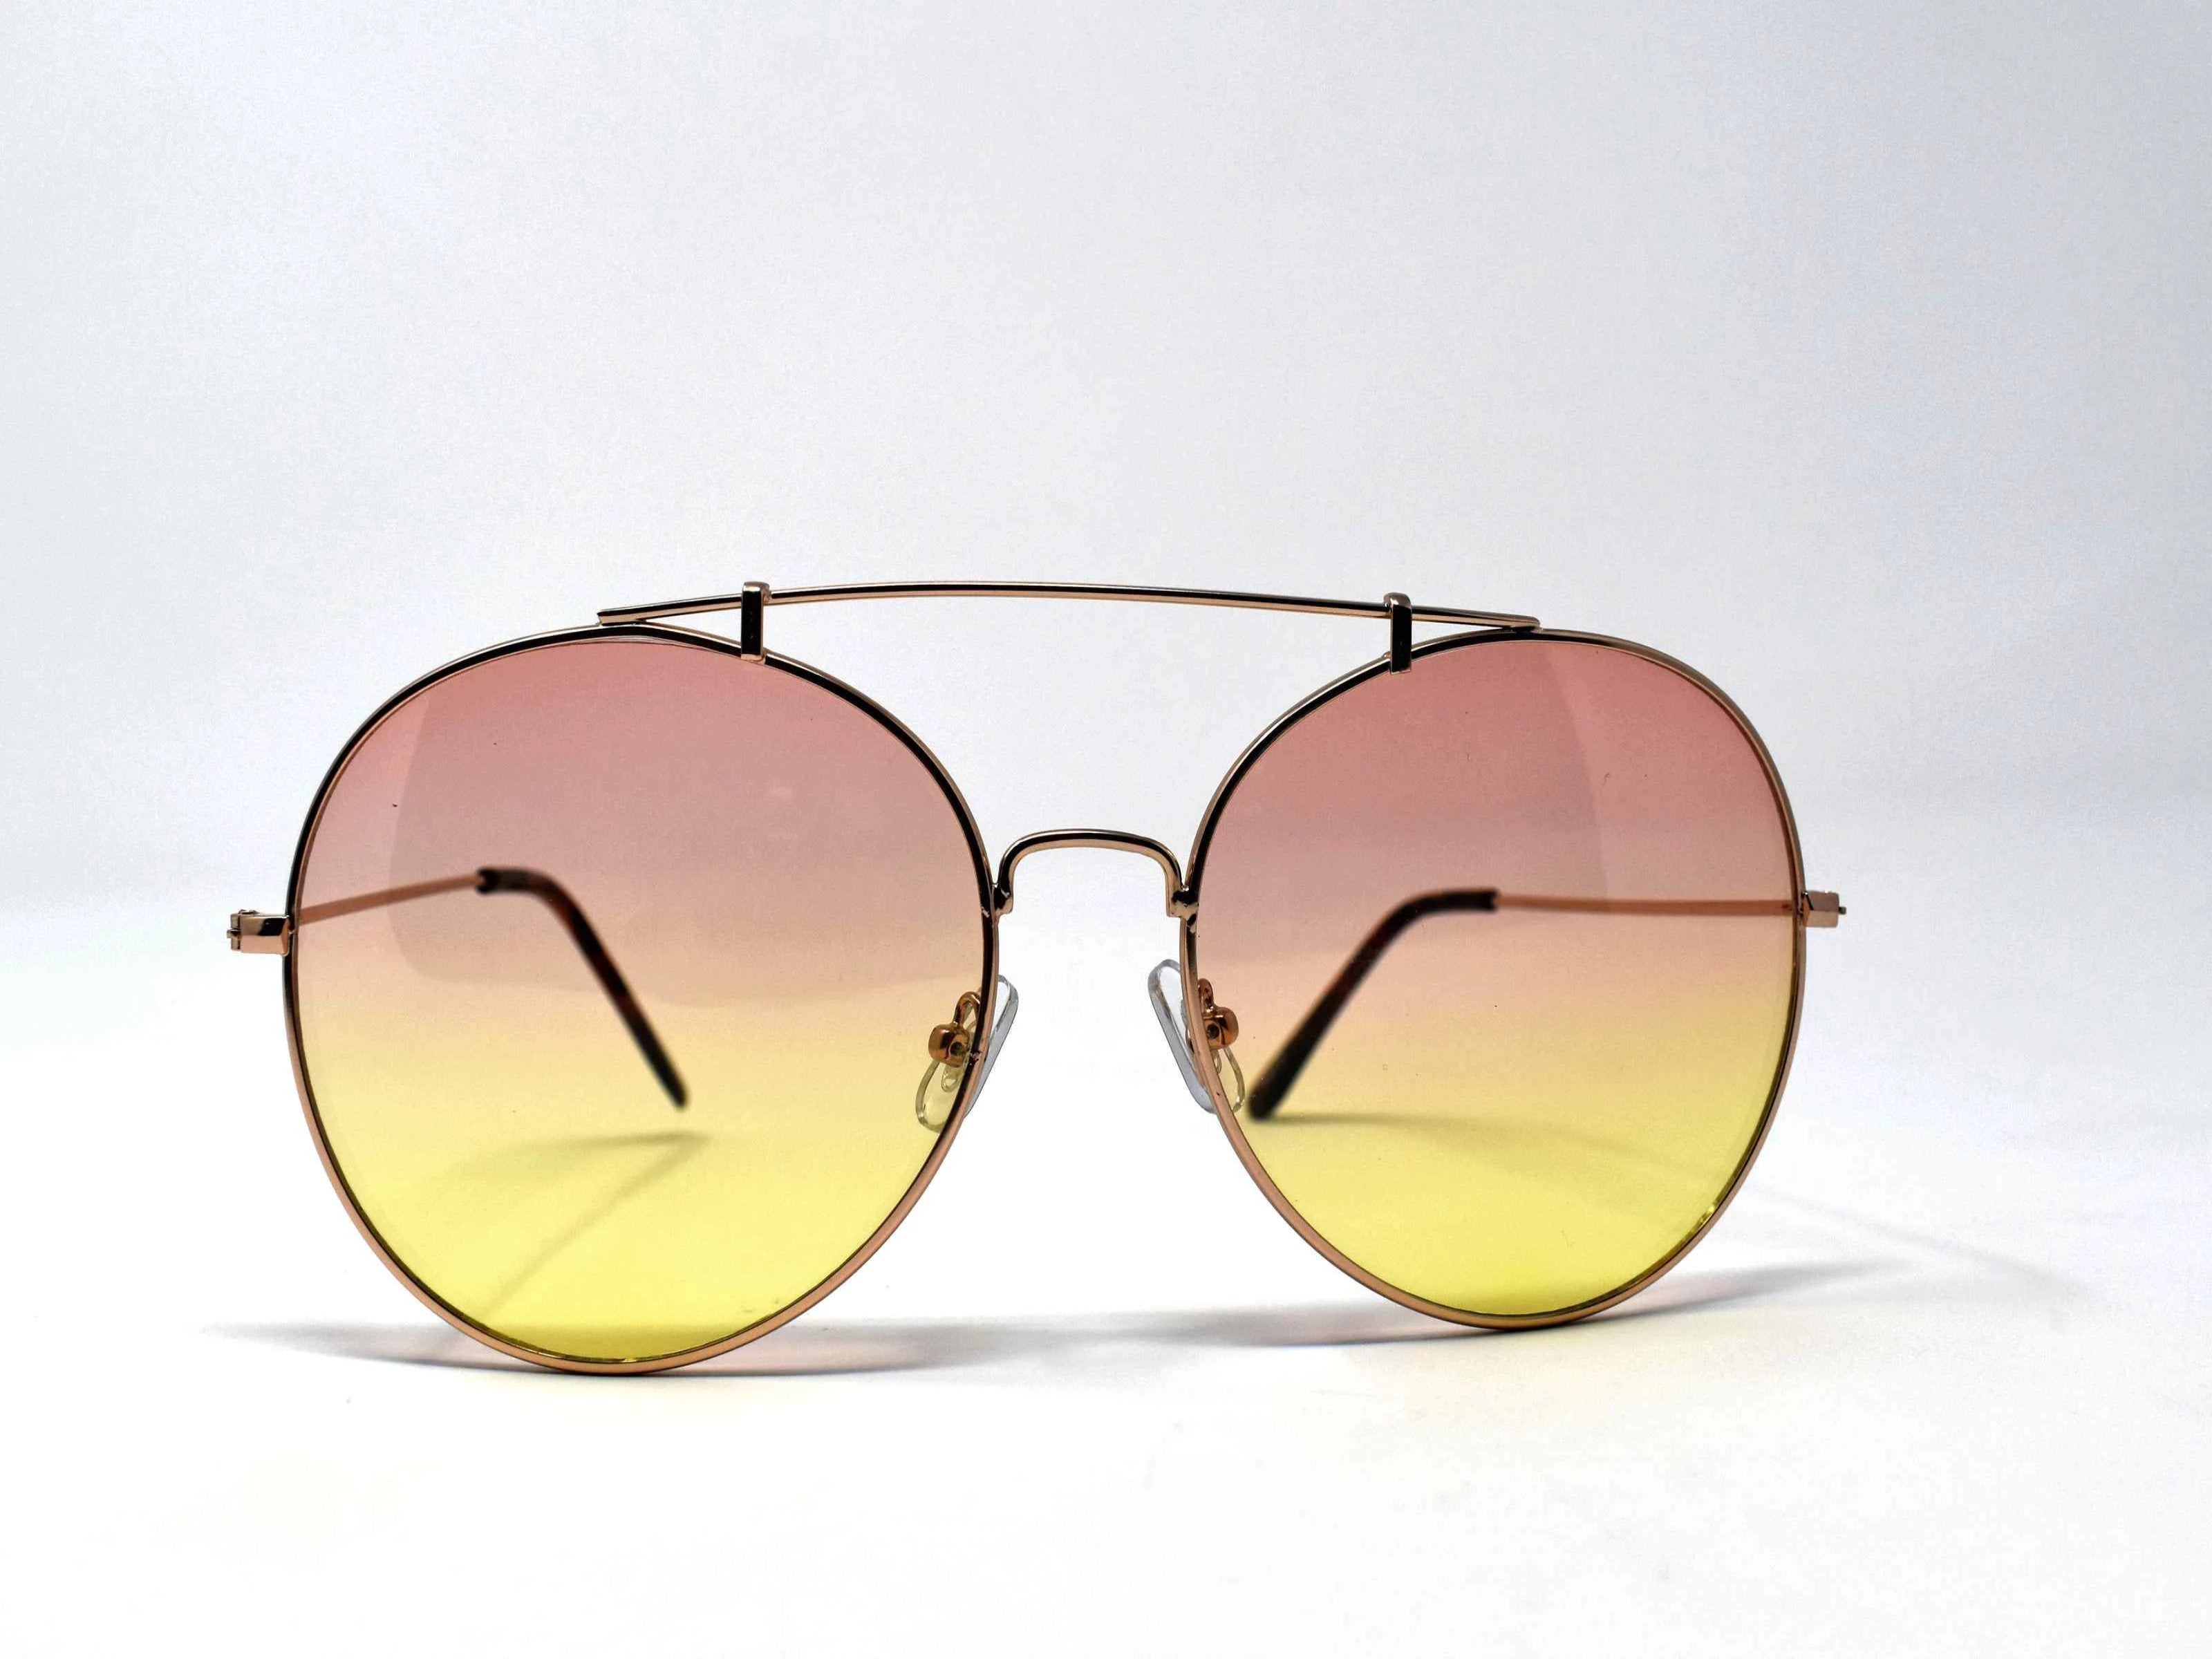 Va Va Voom will be consistently heard in these Vervain gold frame aviator orange and yellow ombre lens sunglasses.